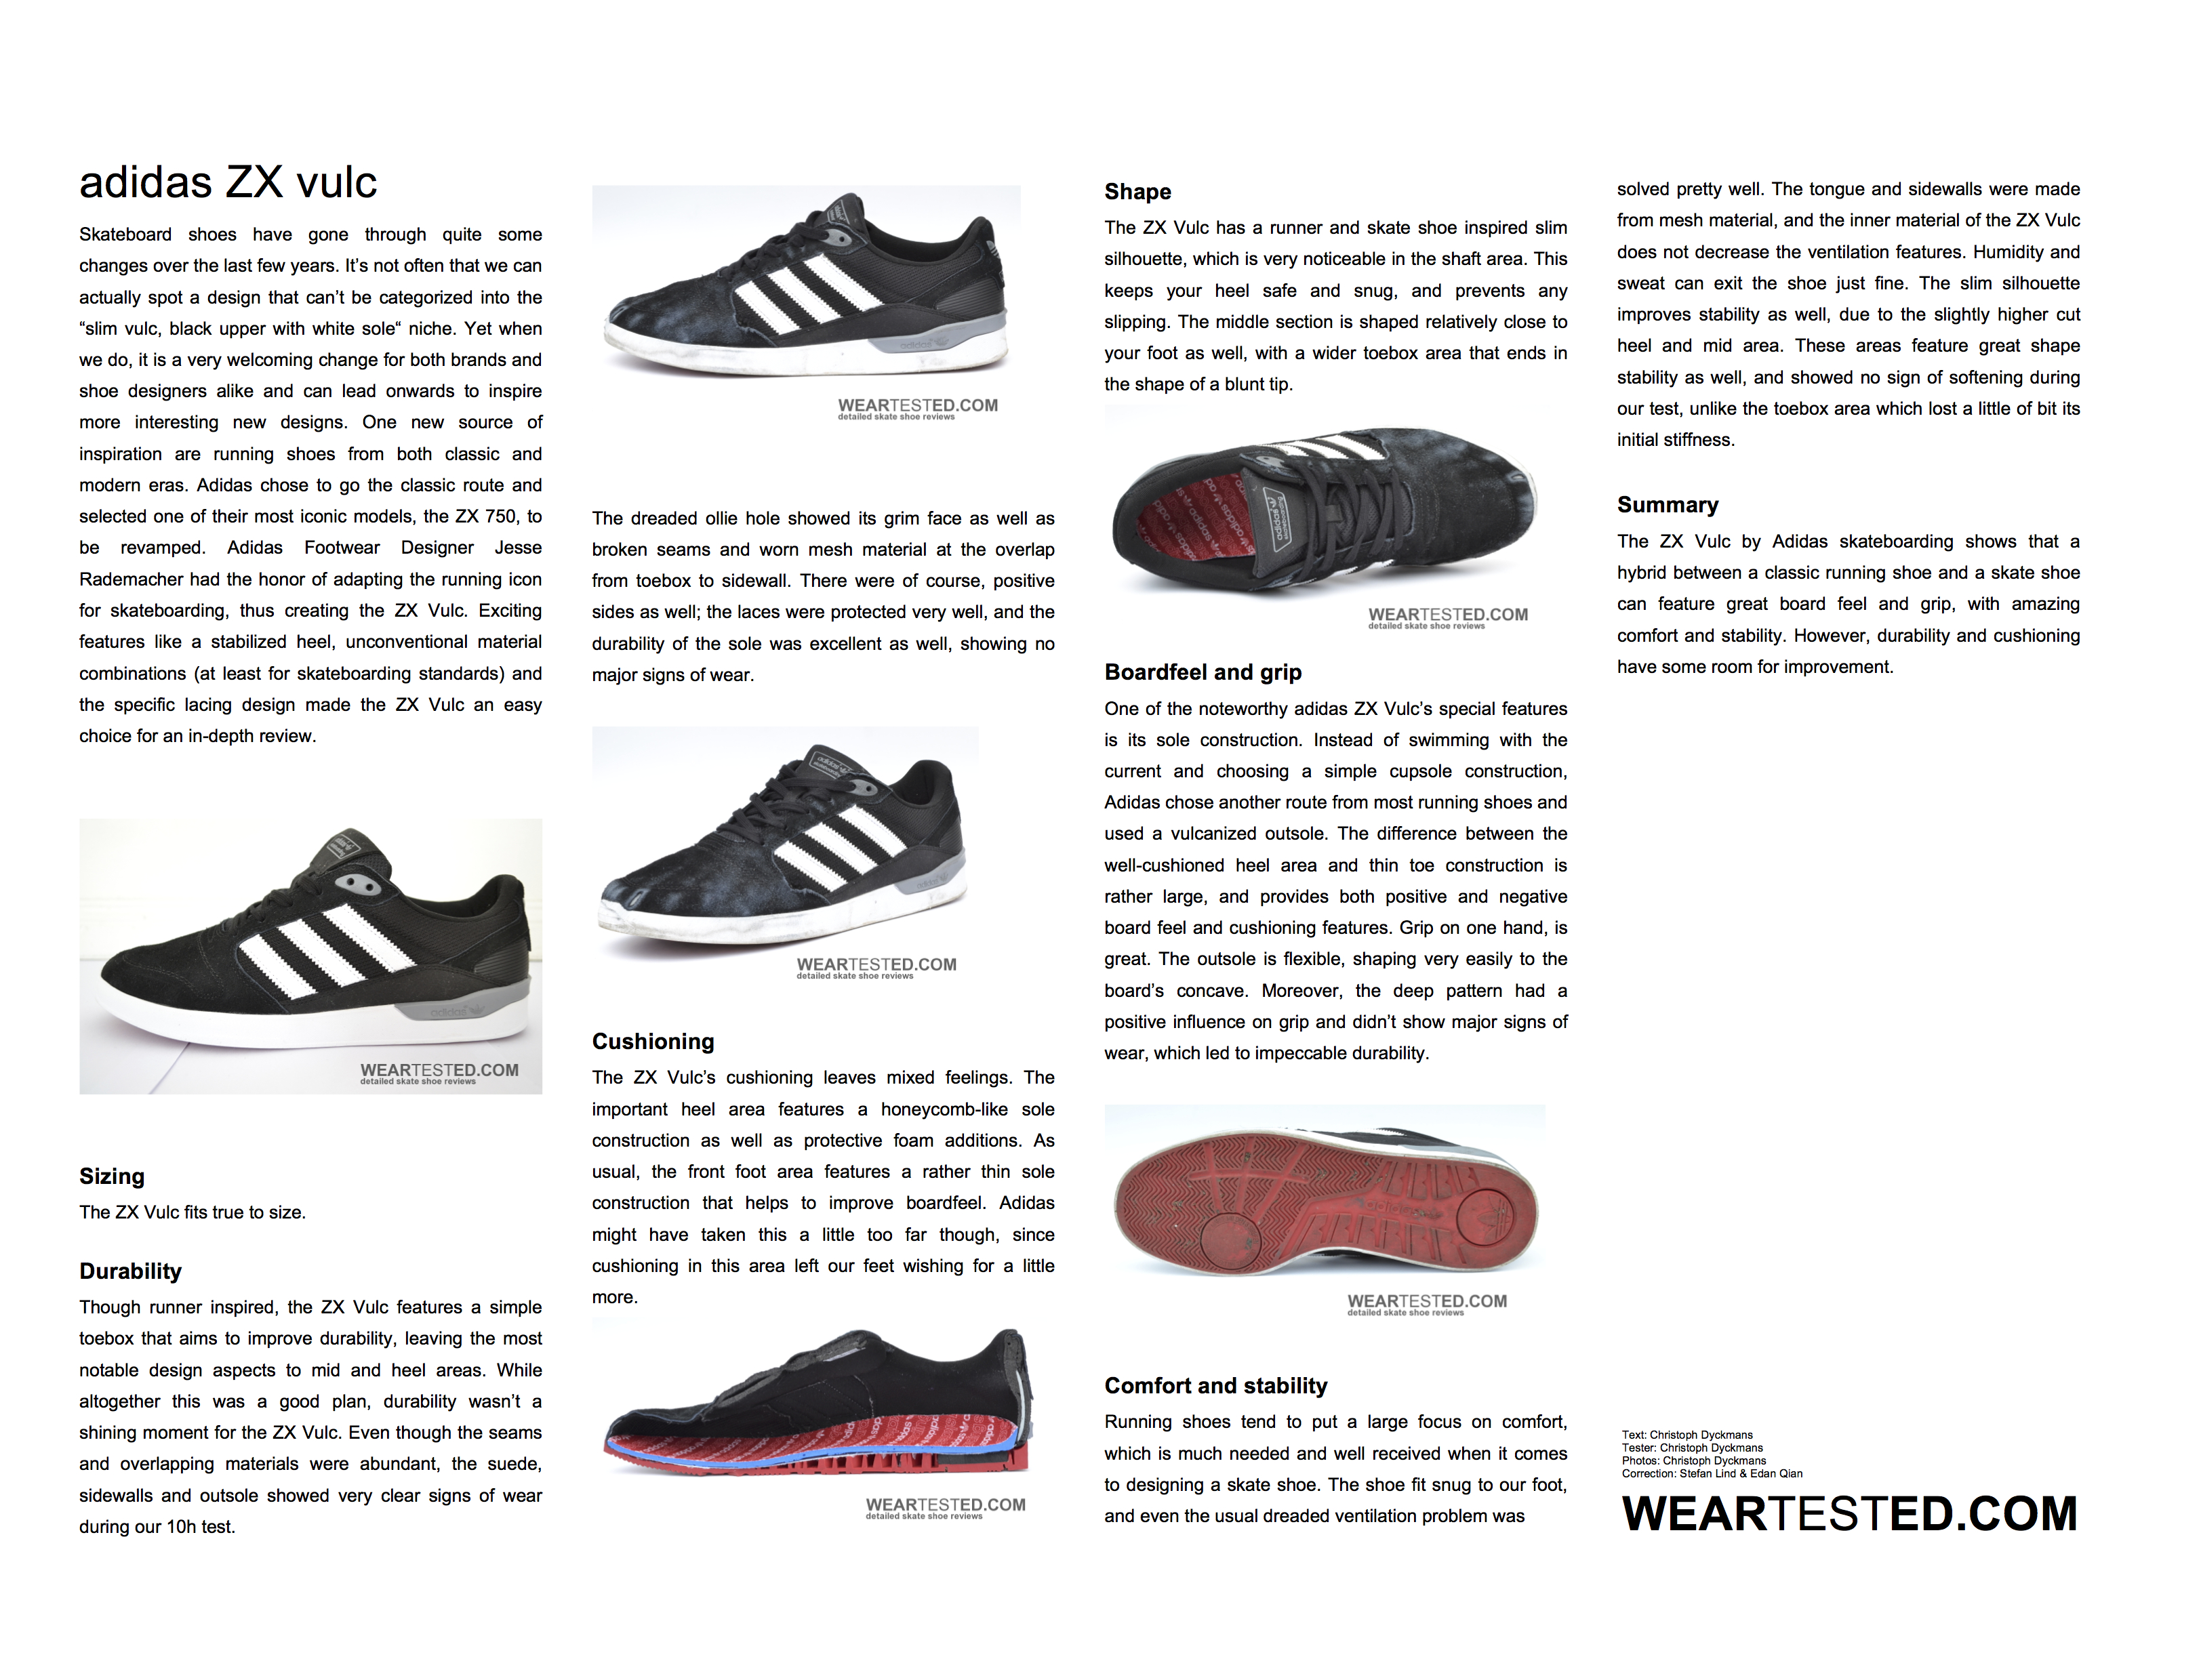 adidas ZX vulc - Weartested - detailed skate shoe reviews